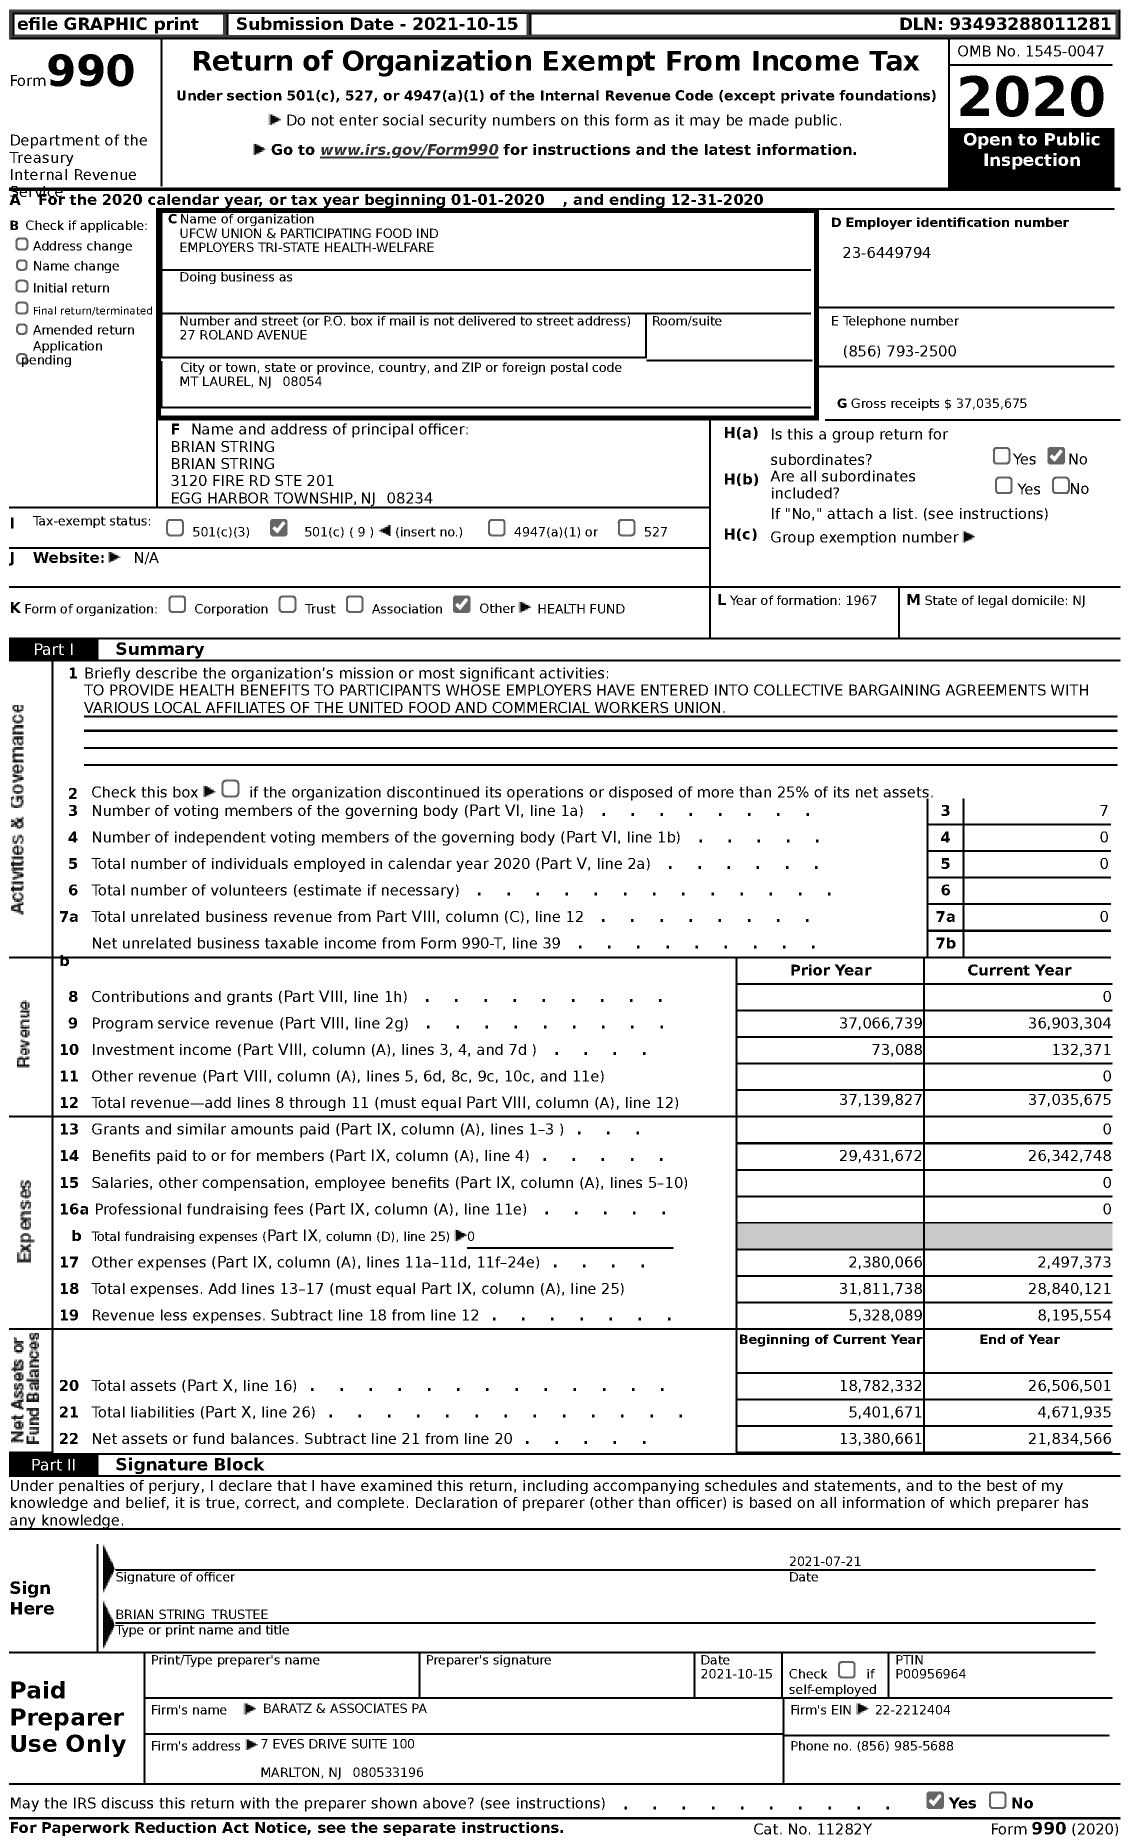 Image of first page of 2020 Form 990 for Ufcw Union and Participating Food Ind Employers Tri-State Health-Welfare